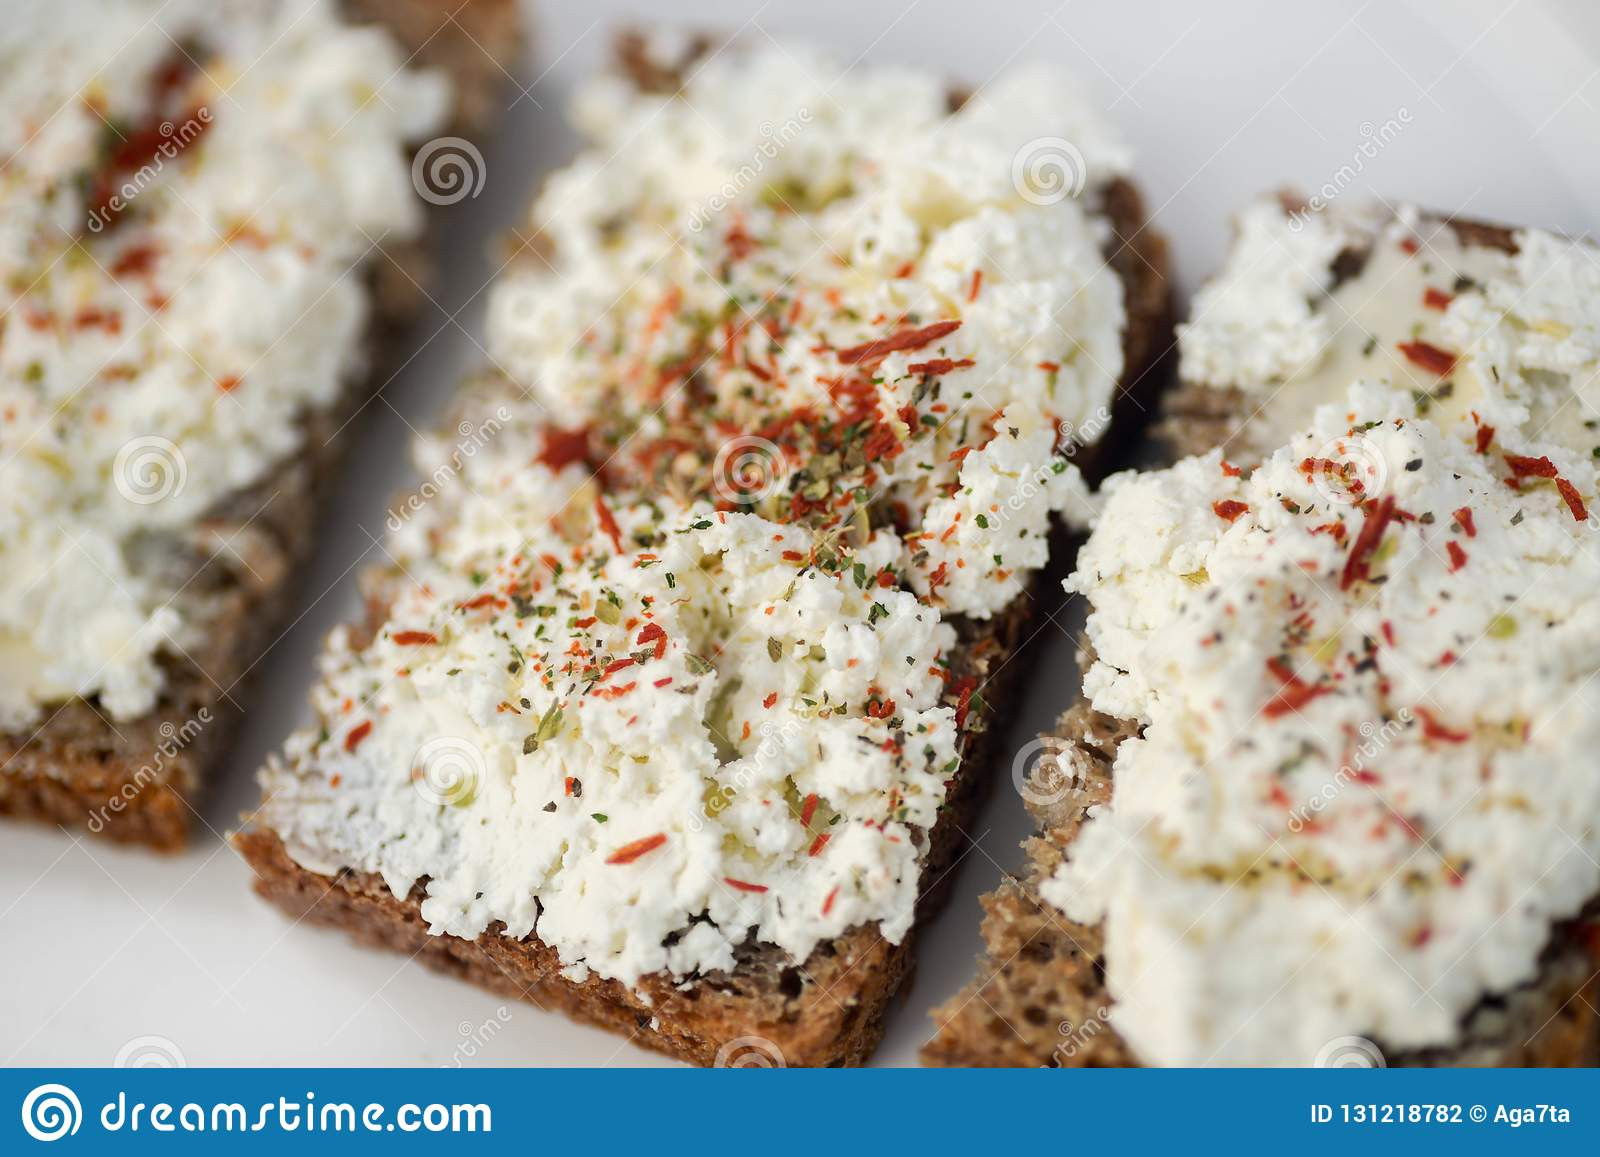 Cottage Cheese Sandwiches
 Sandwiches With Cottage Cheese And Herbs Stock